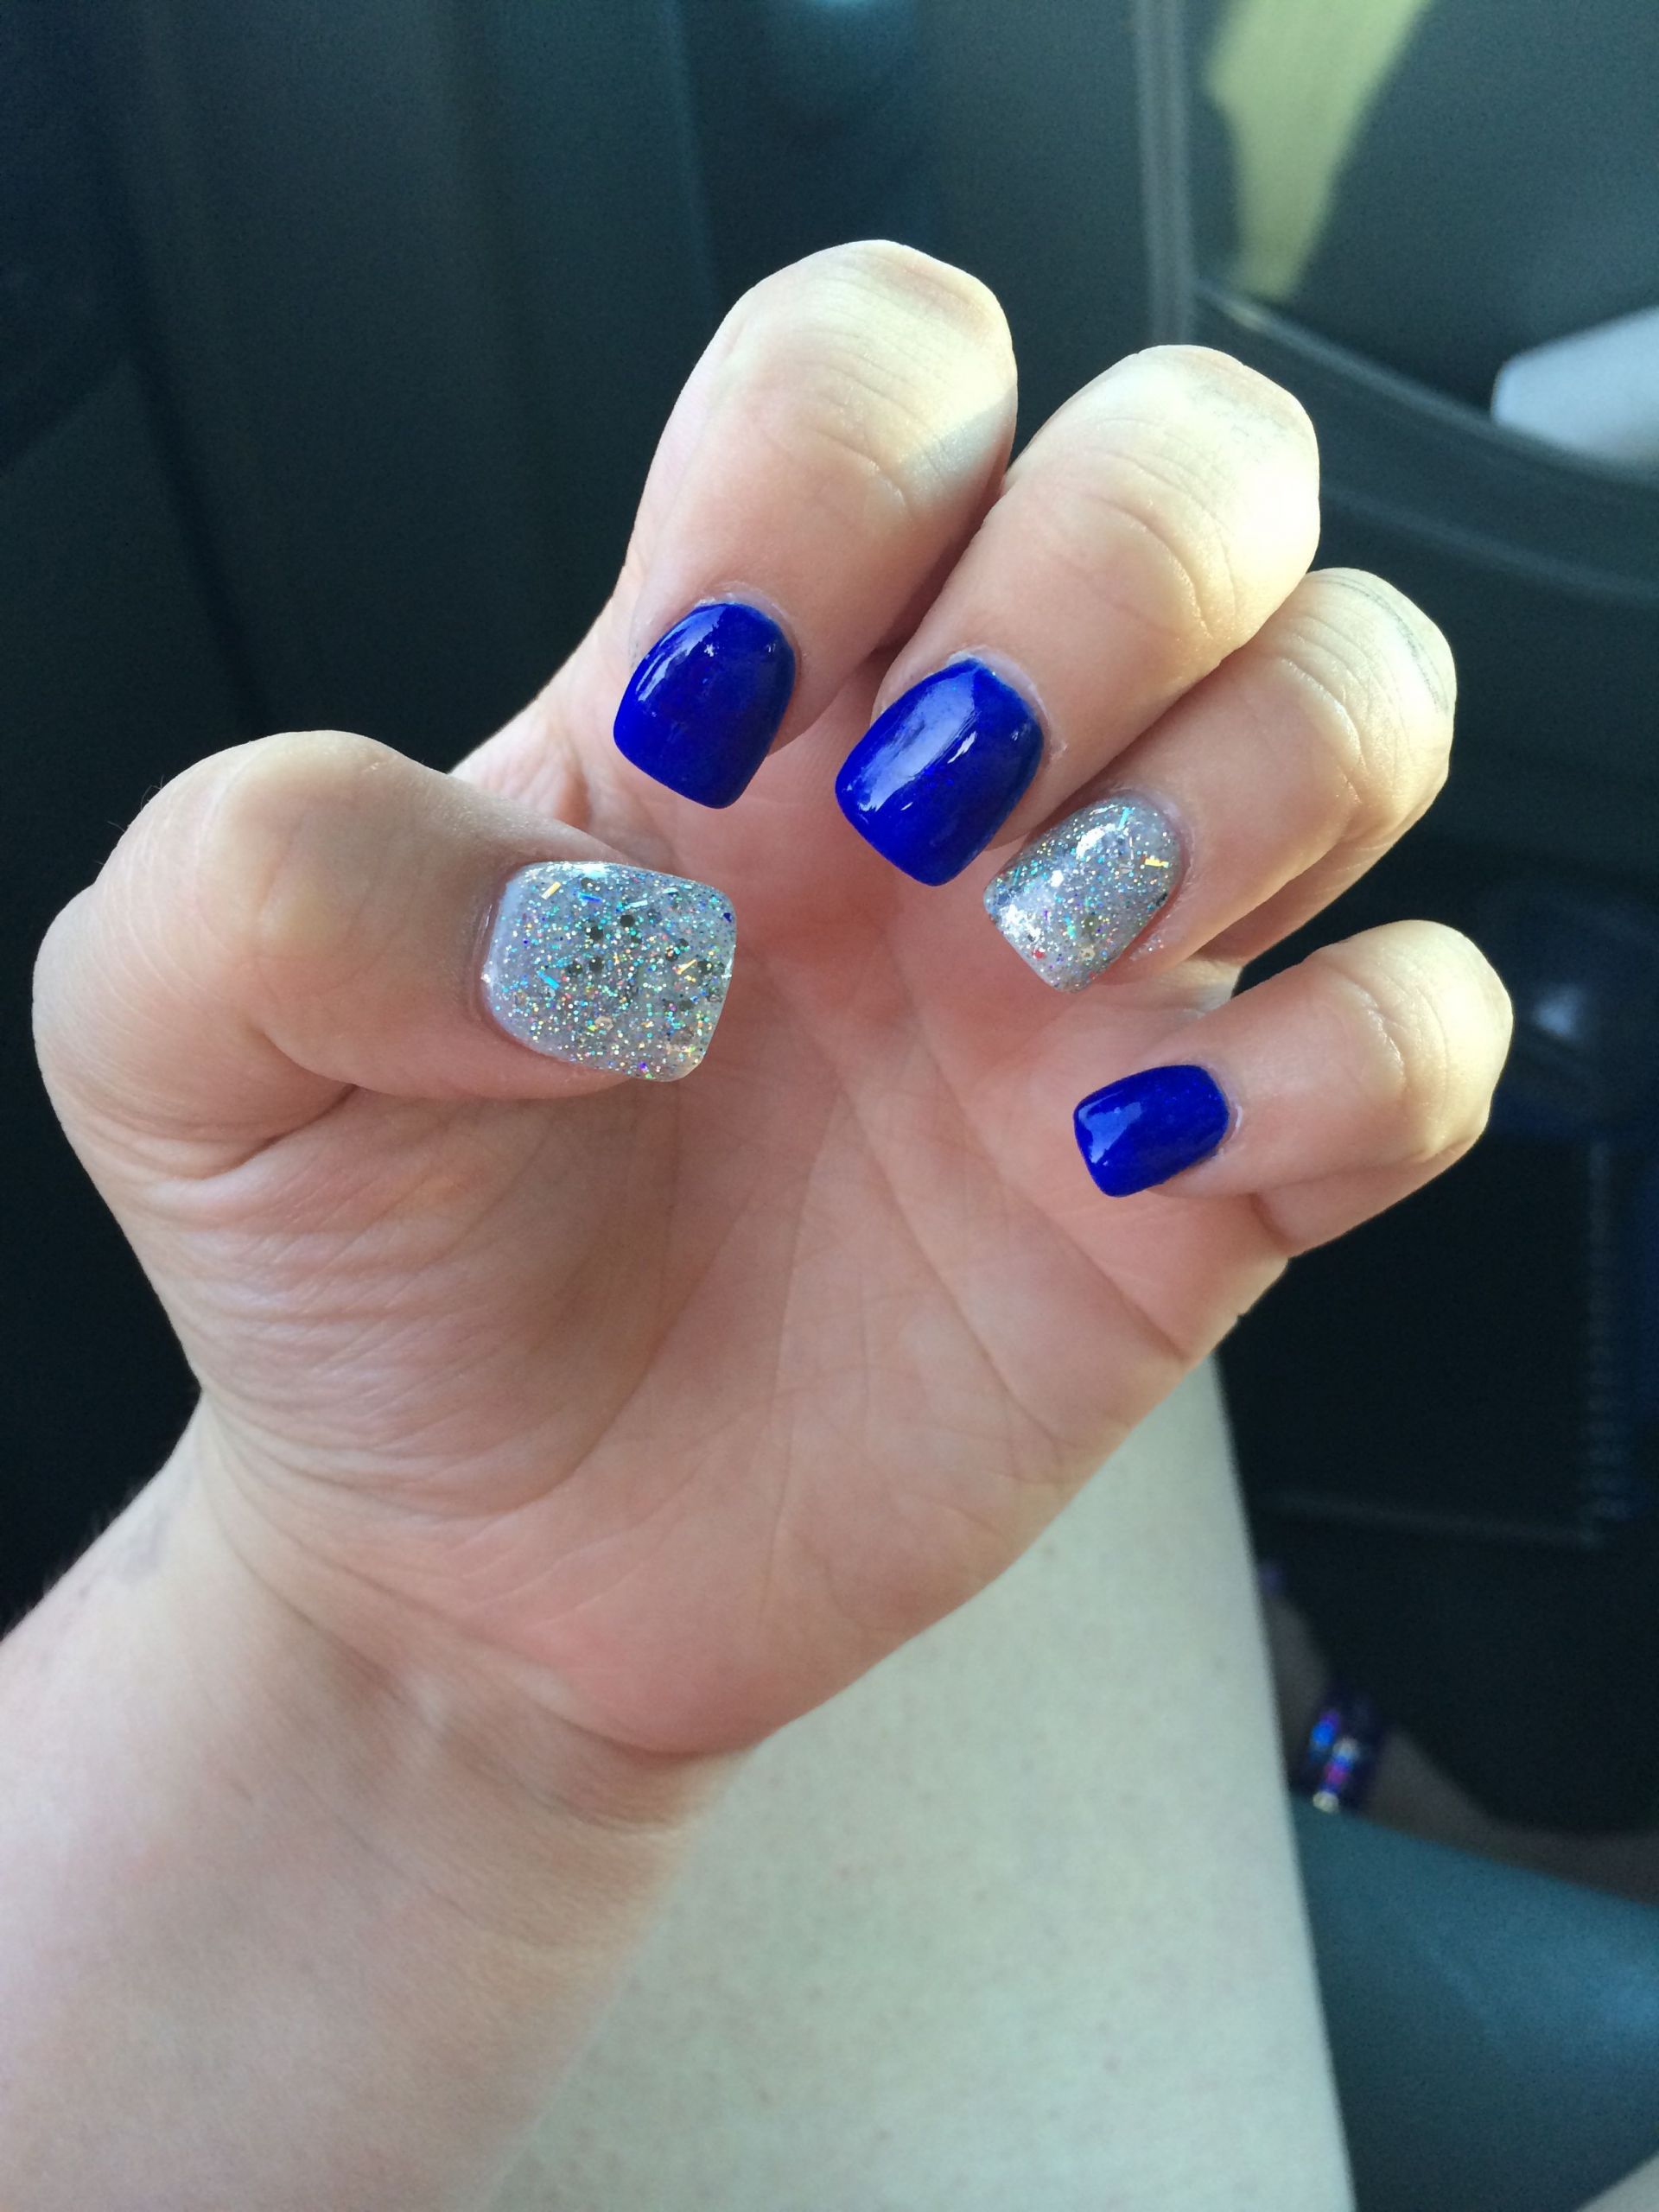 Royal Blue Glitter Nails
 The Best Royal Blue Coffin Nails With Silver Glitter